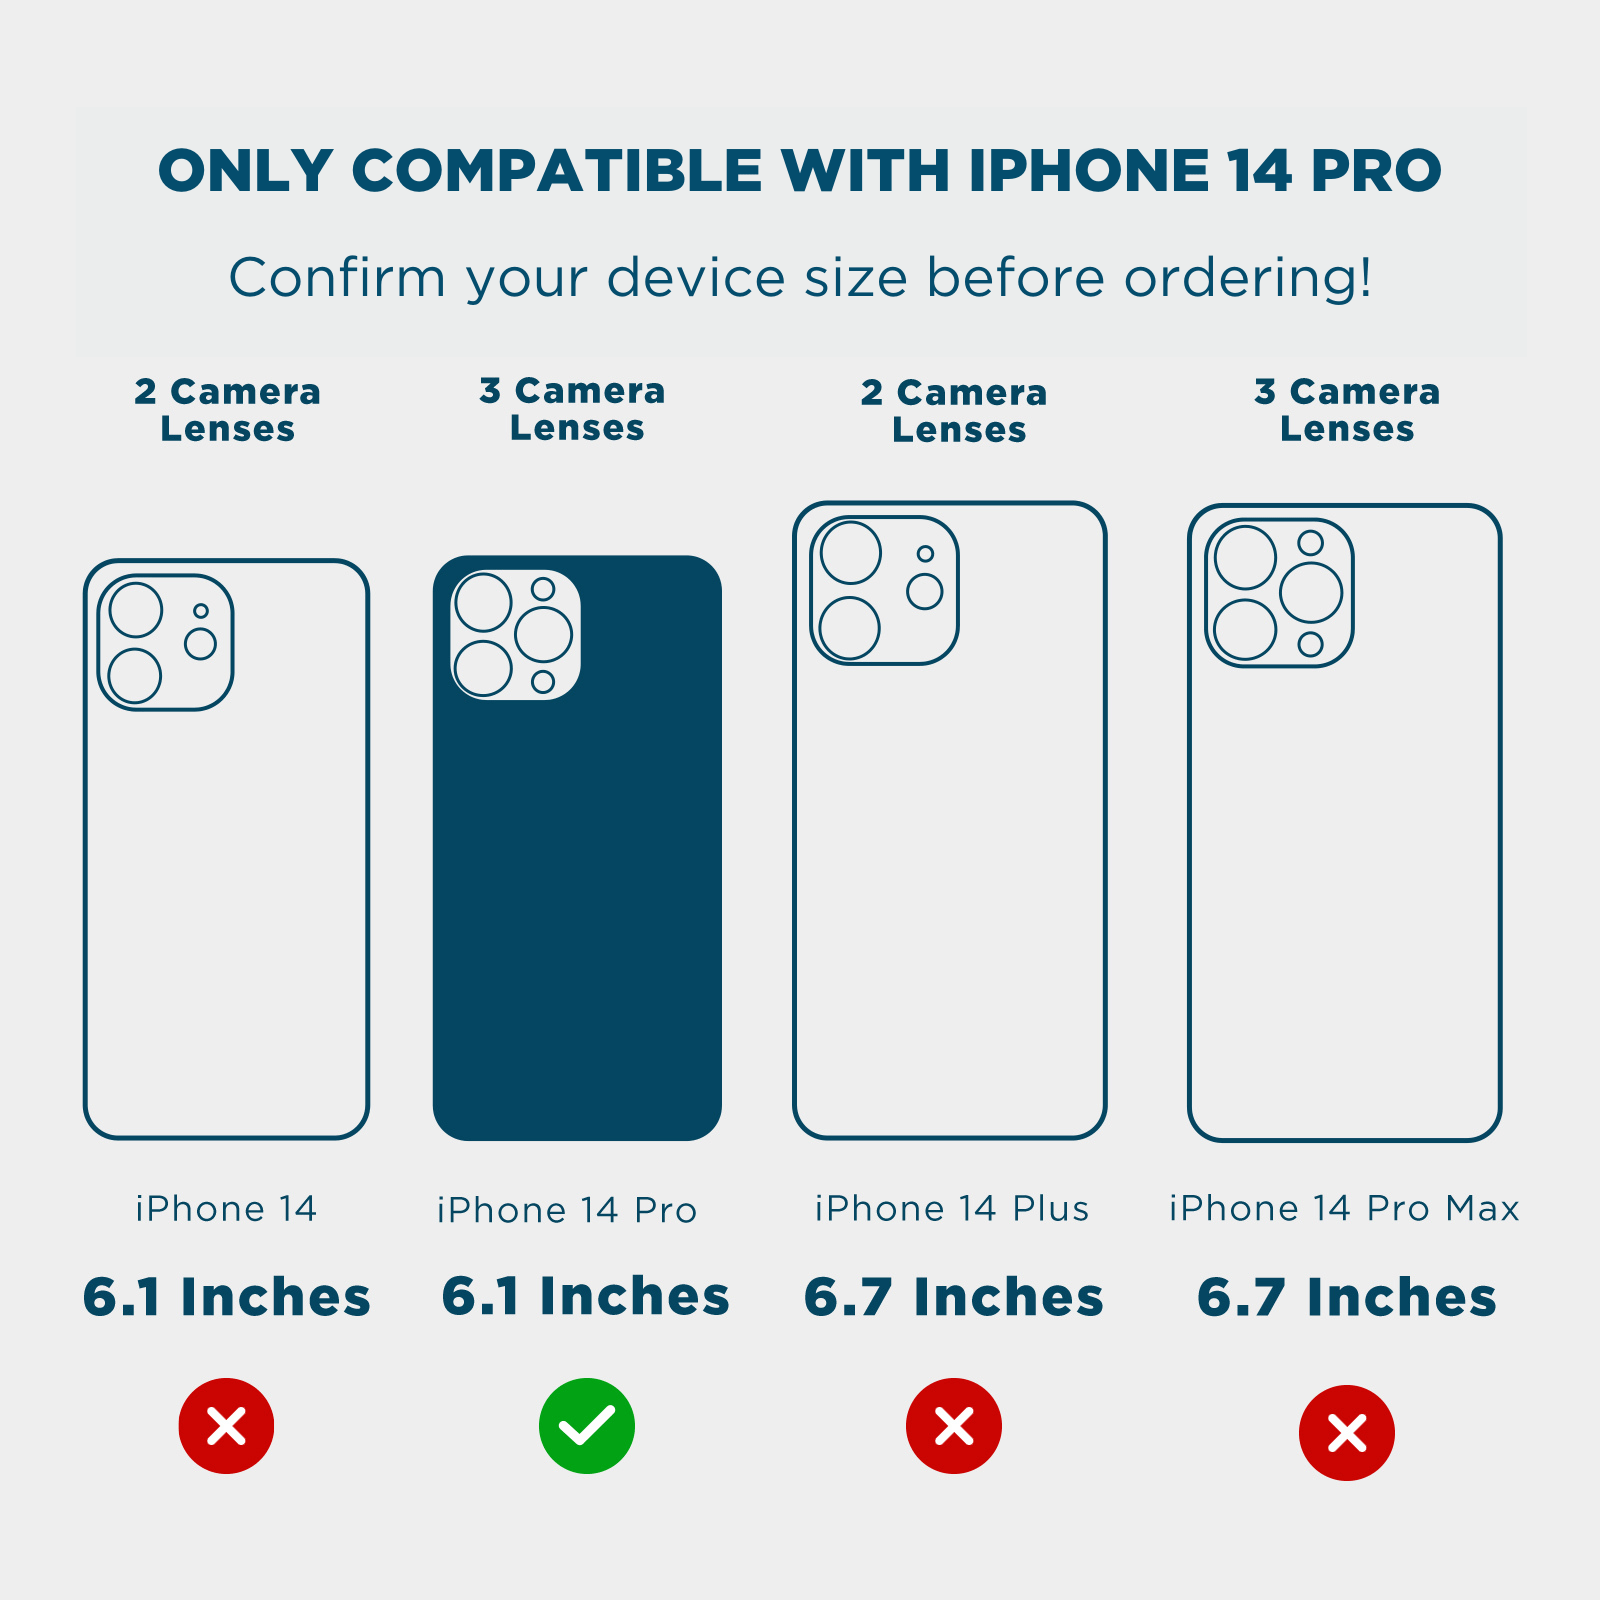 ONLY COMPATIBLE WITH IPHONE 14 PRO. CONFIRM YOUR DEVICE SIZE BEFORE ORDERING. 2 CAMERA LENSES, 3 CAMERA LENSES, 2 CAMERA LENSES, 3 CAMERA LENSES, 6.1, 6.1, 6.7, 6.7. COLOR::TWINKLE DIAMOND